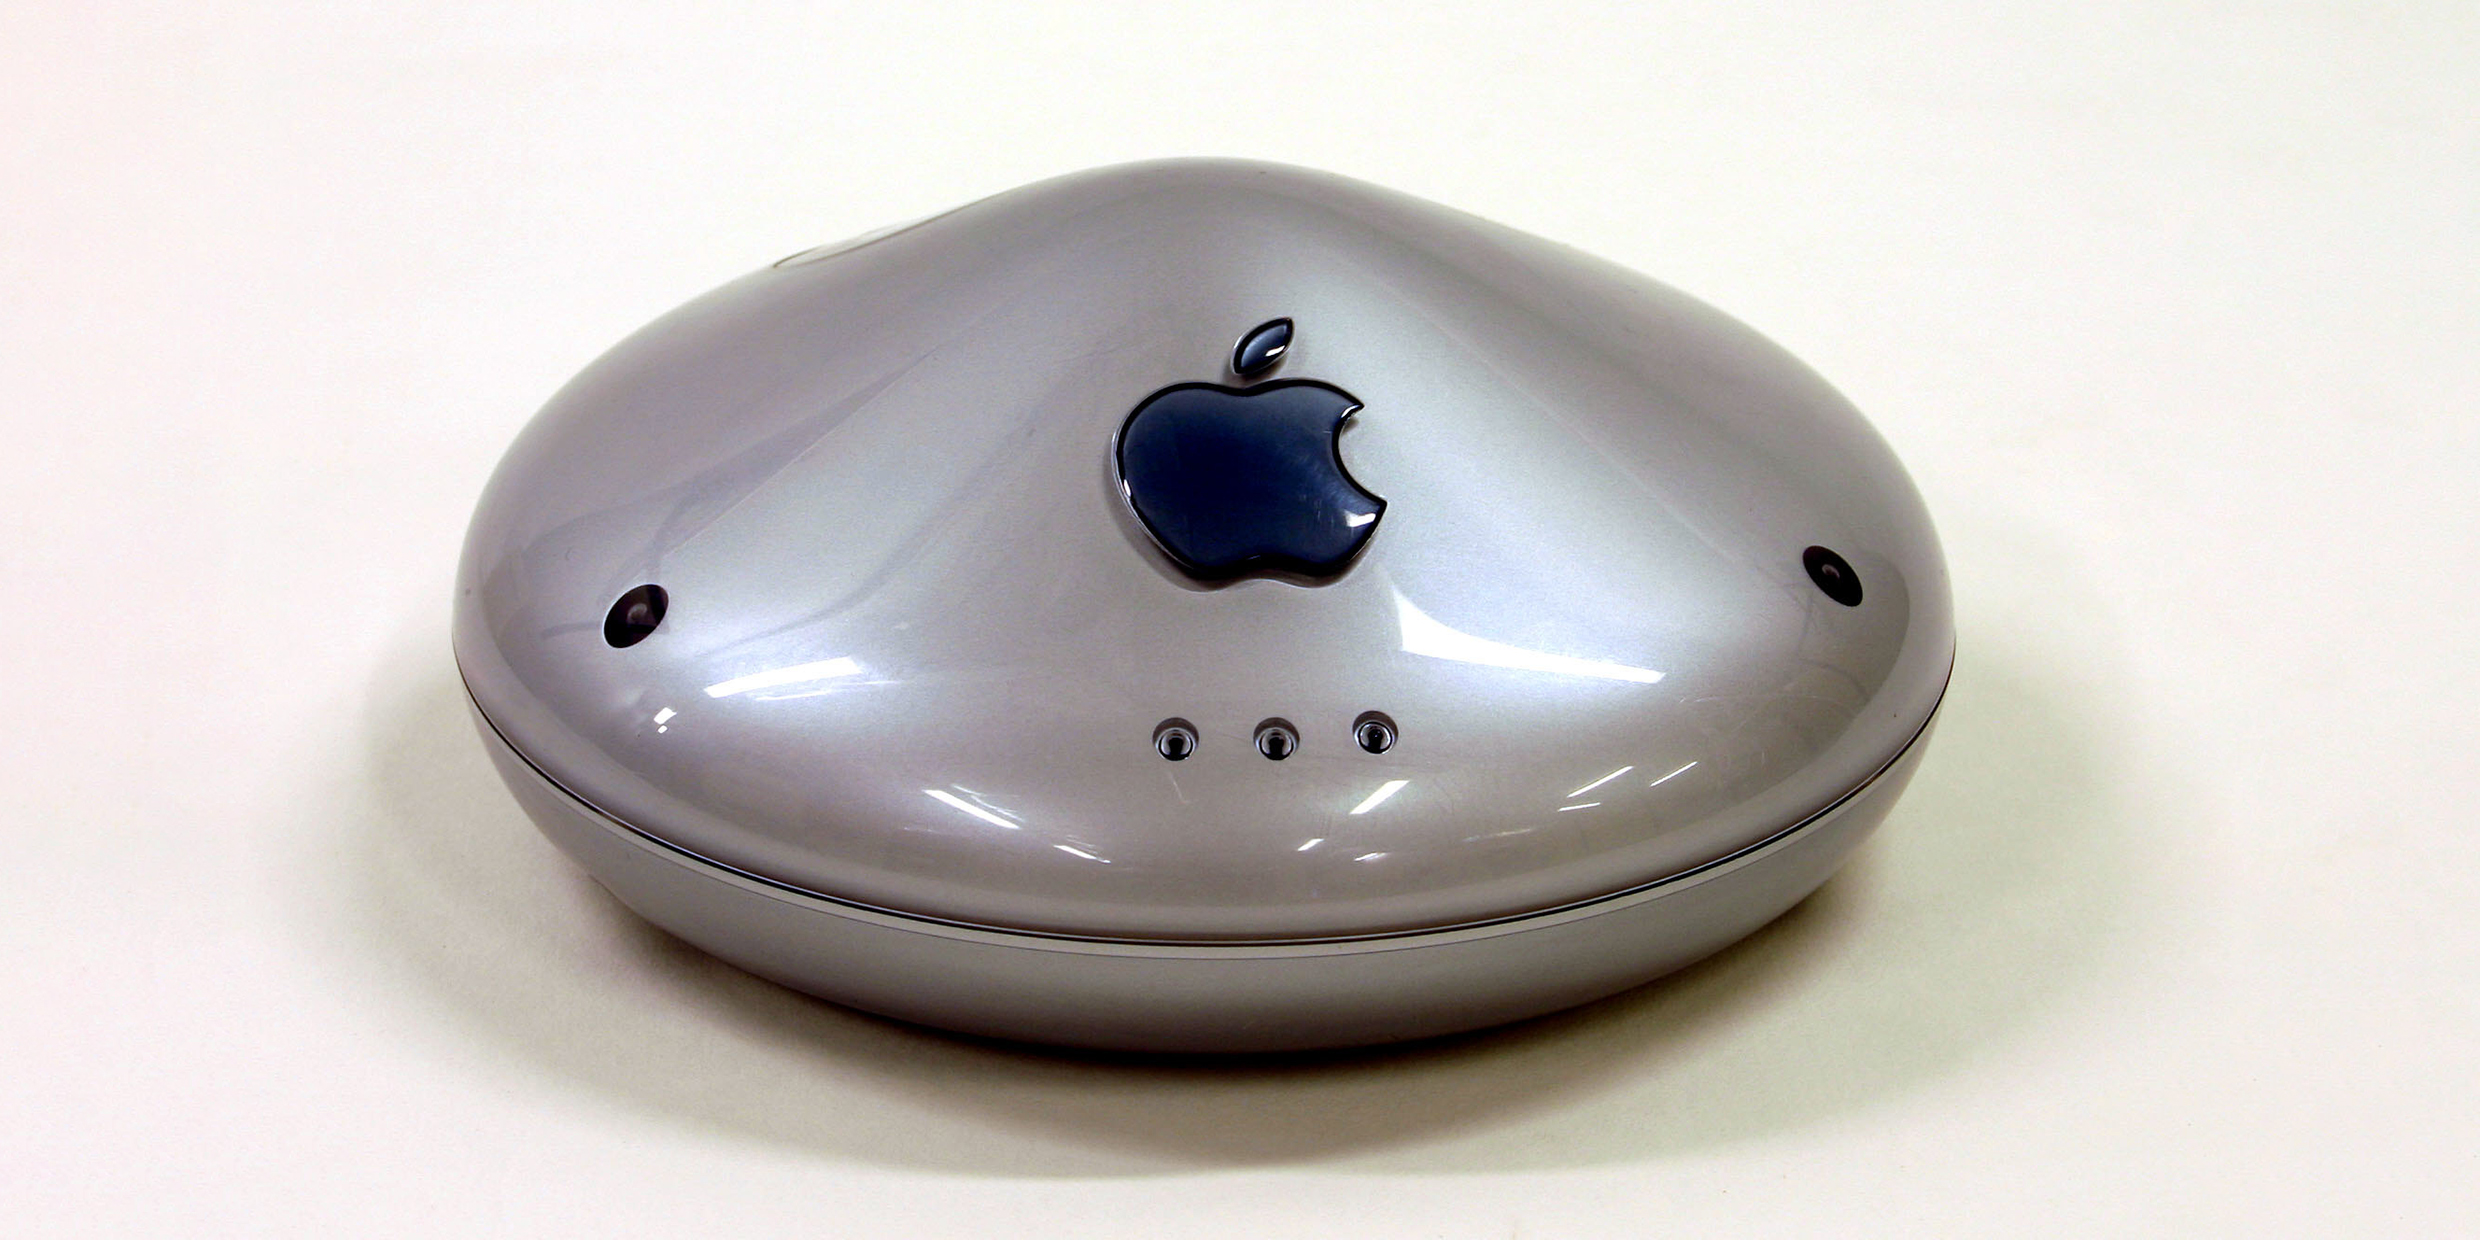 Image of a round wireless router with a large Apple logo